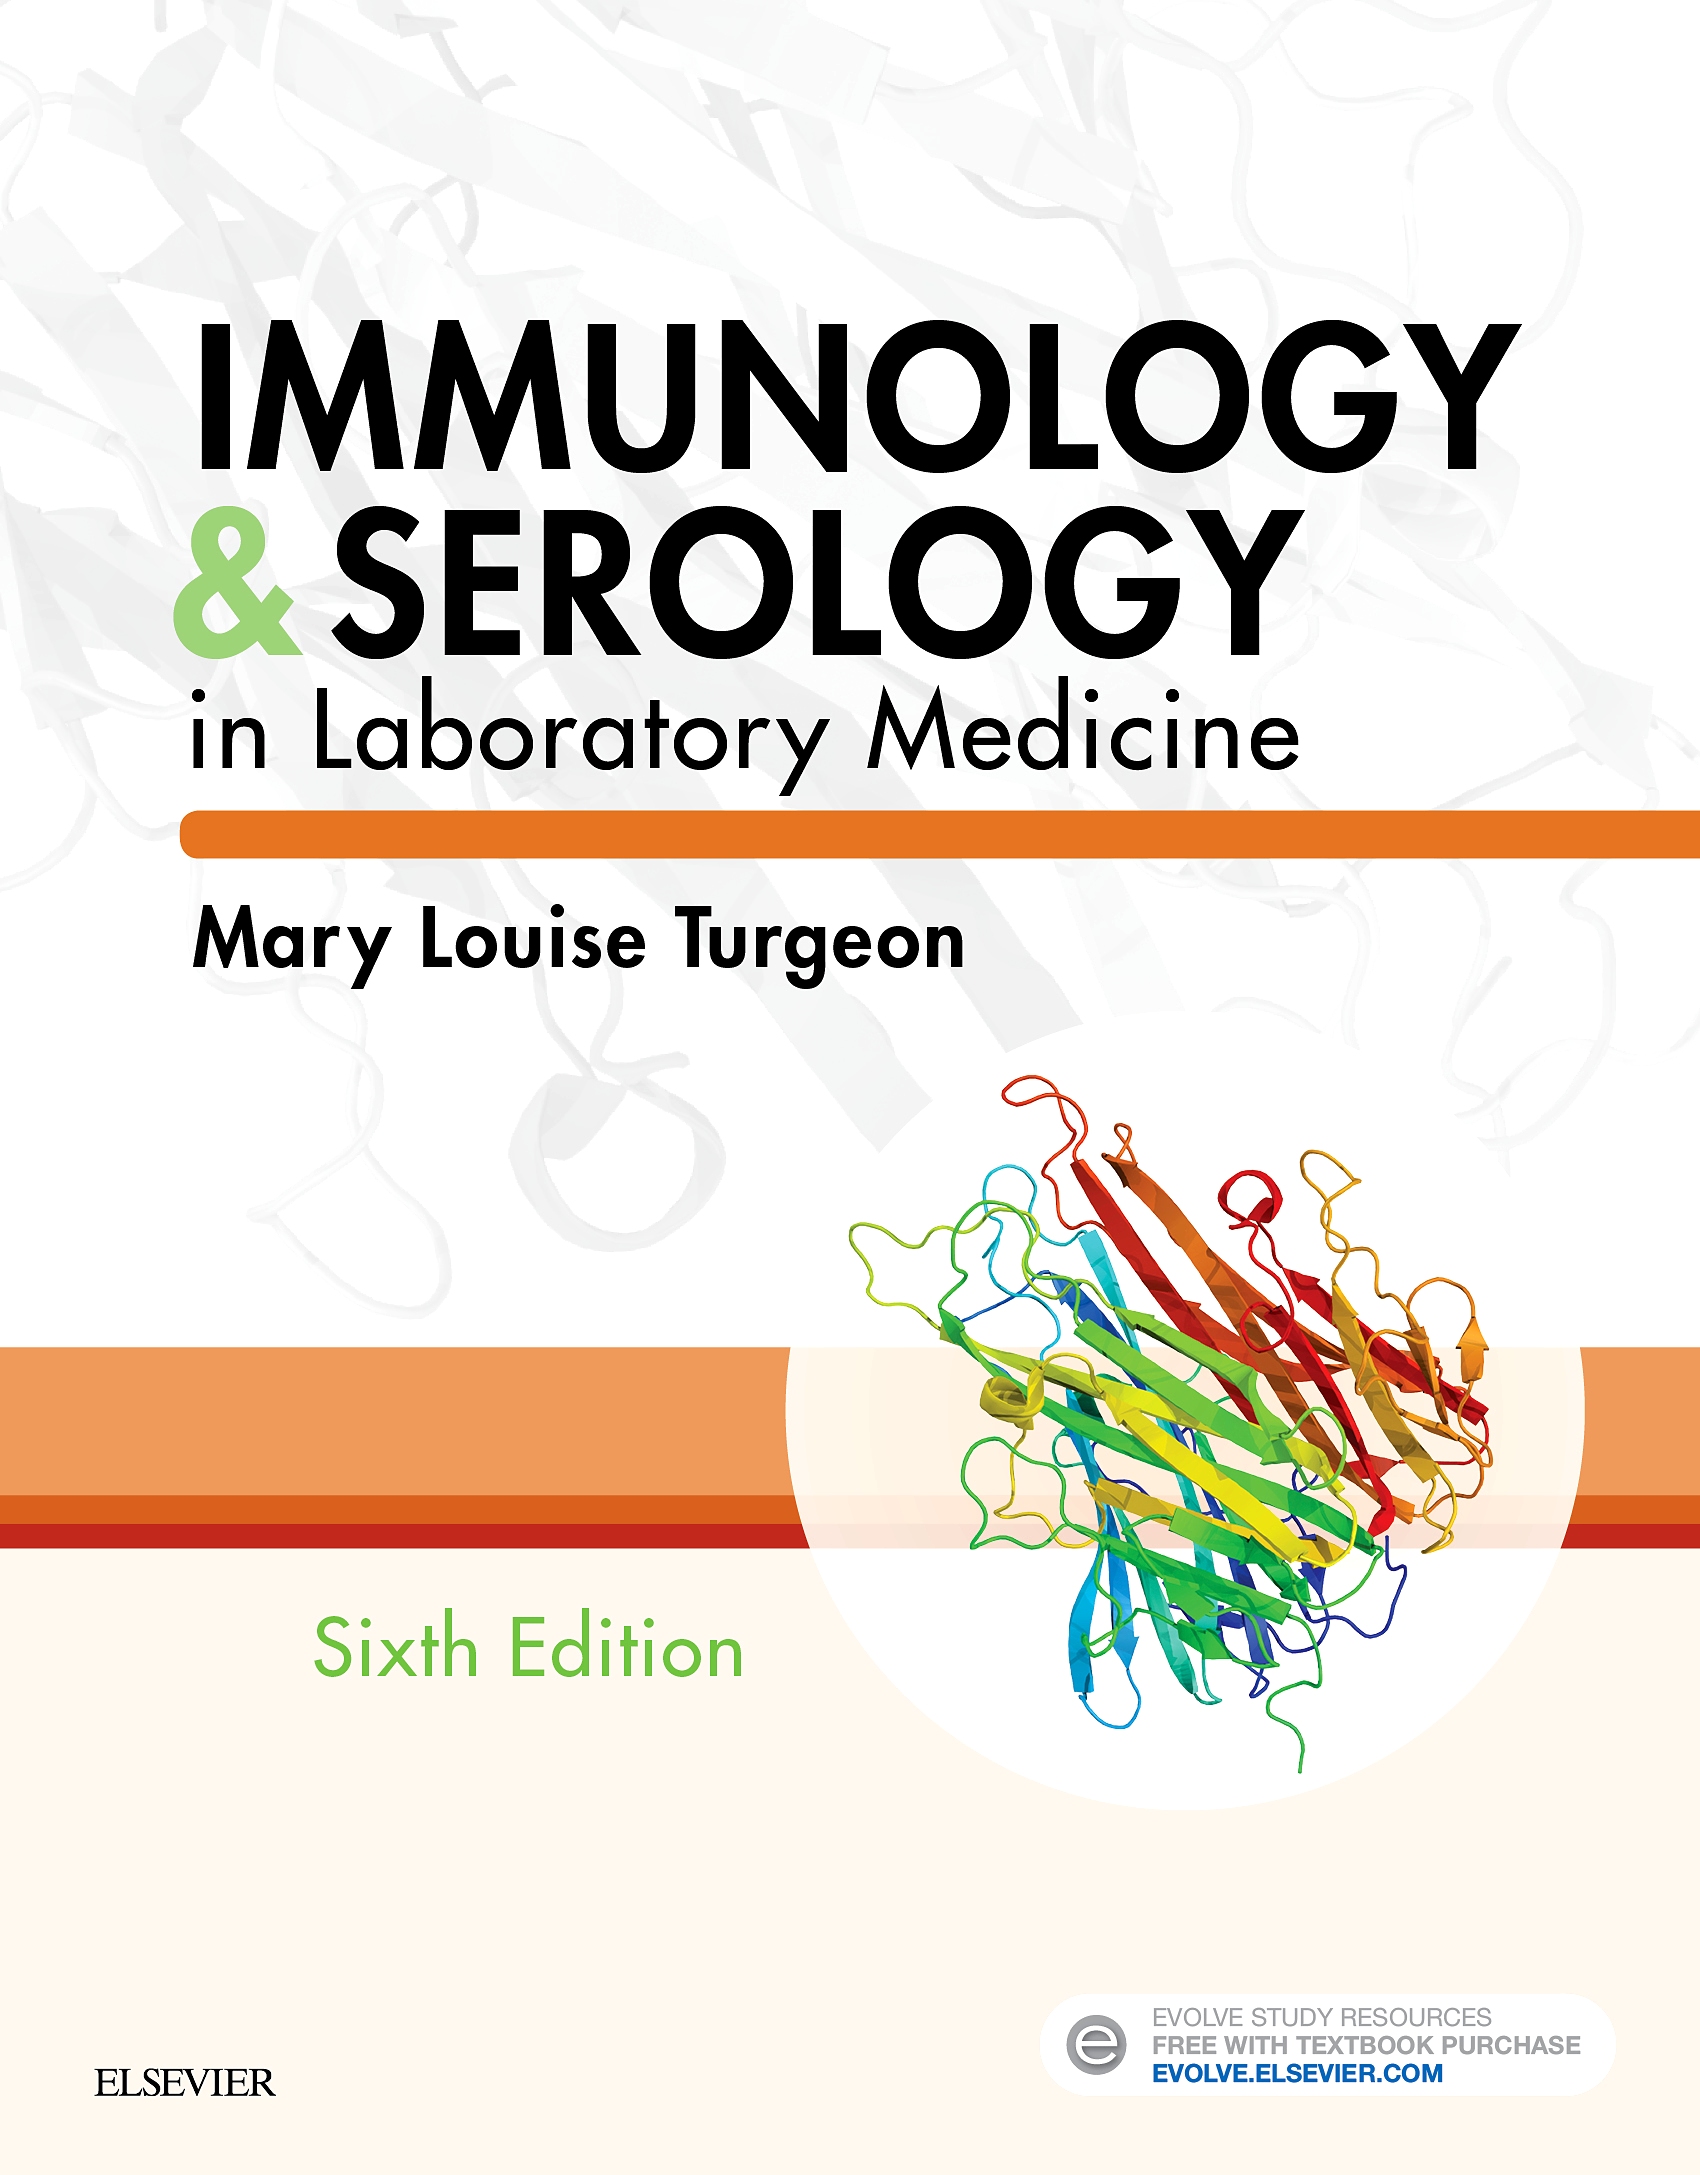 Evolve Resources for Immunology & Serology in Laboratory Medicine, 6th Edition